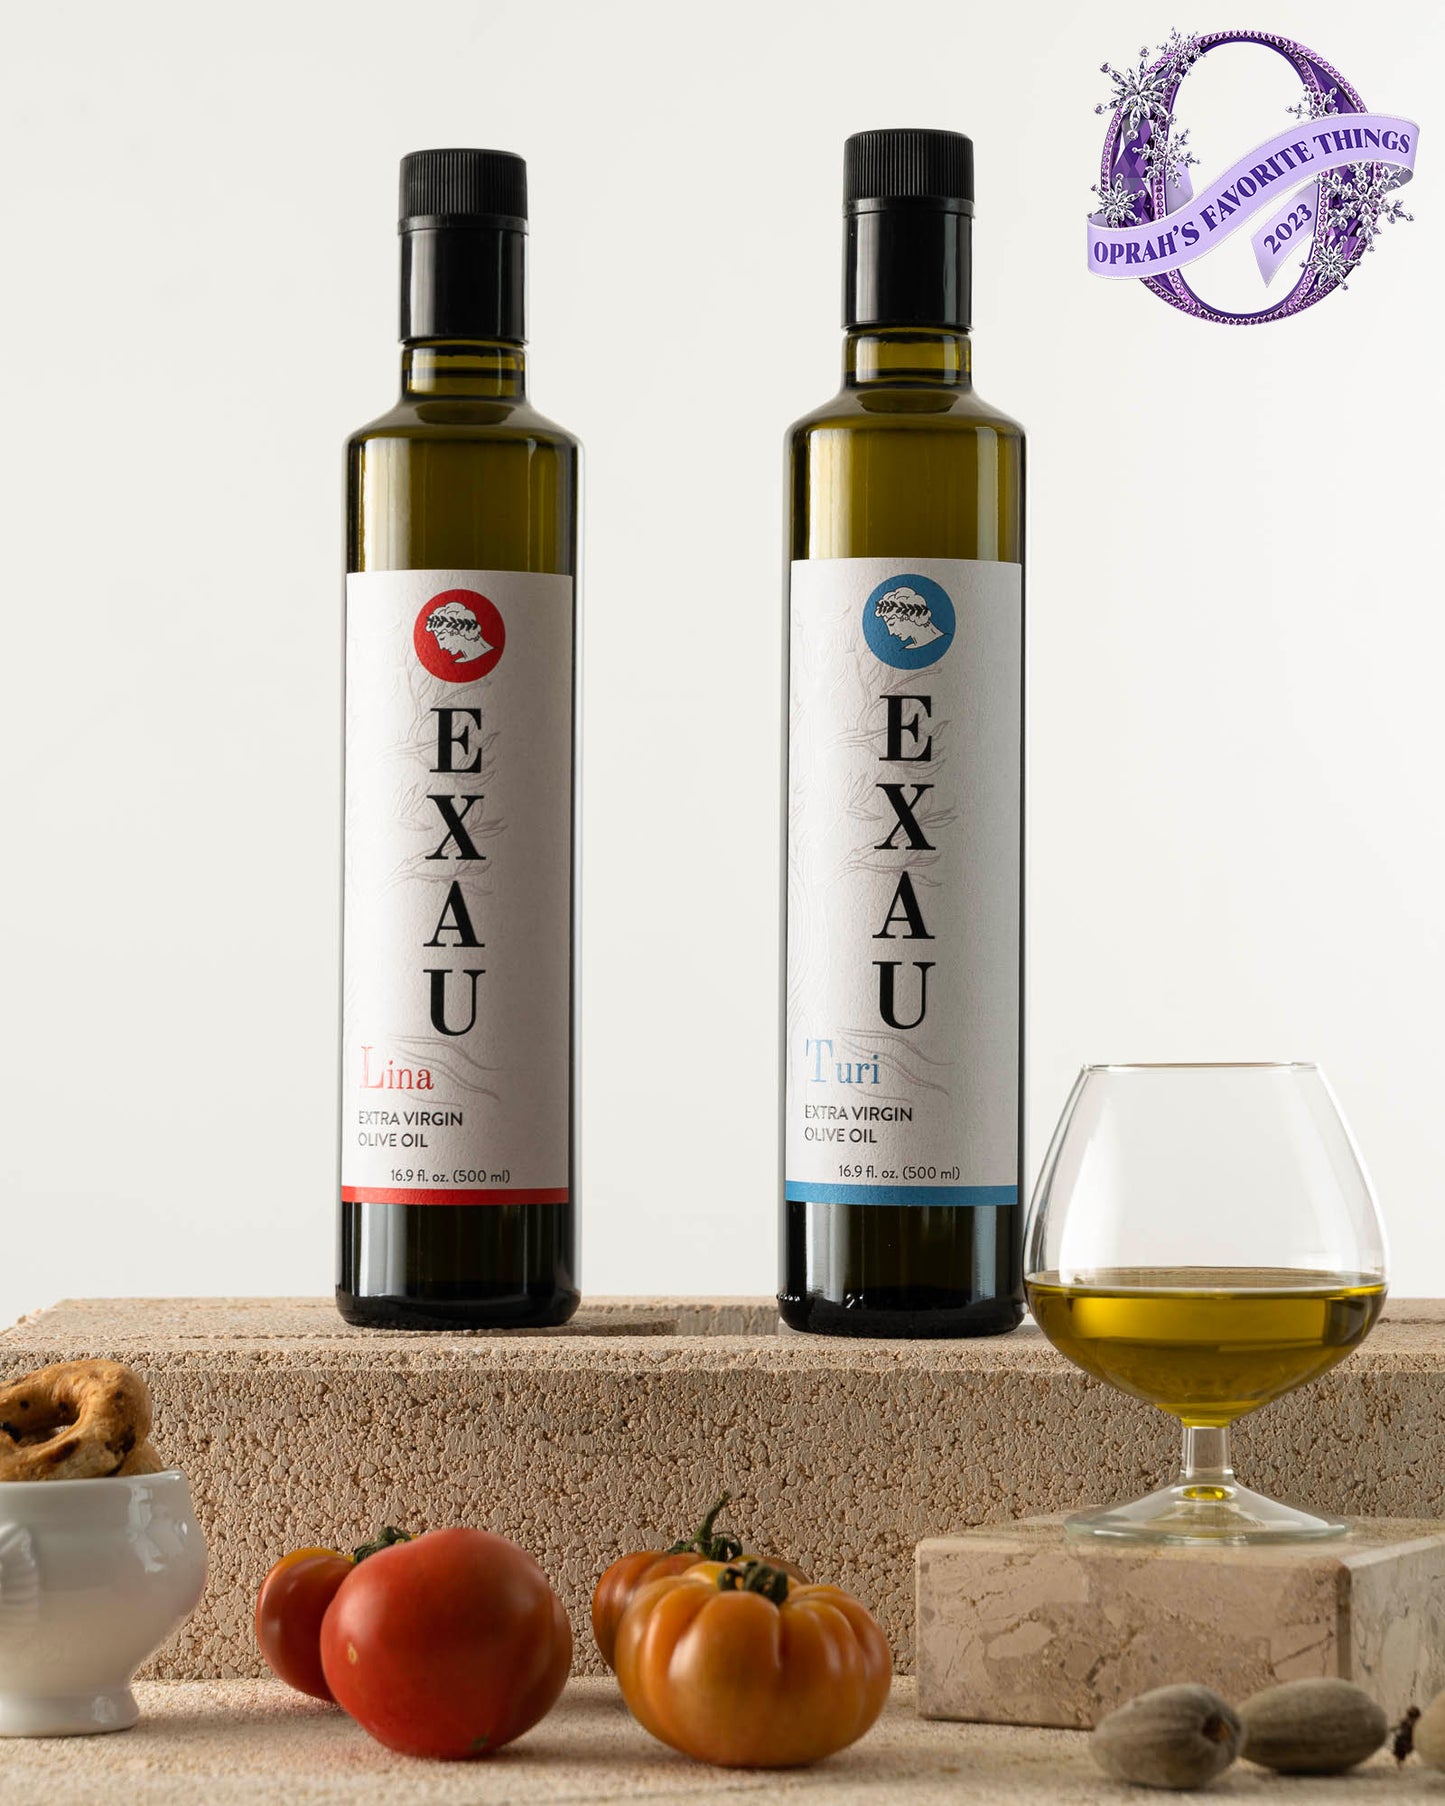 Due2 Olive Oil Holiday Gift Set - Oprah's Favorite Things – EXAU Olive Oil